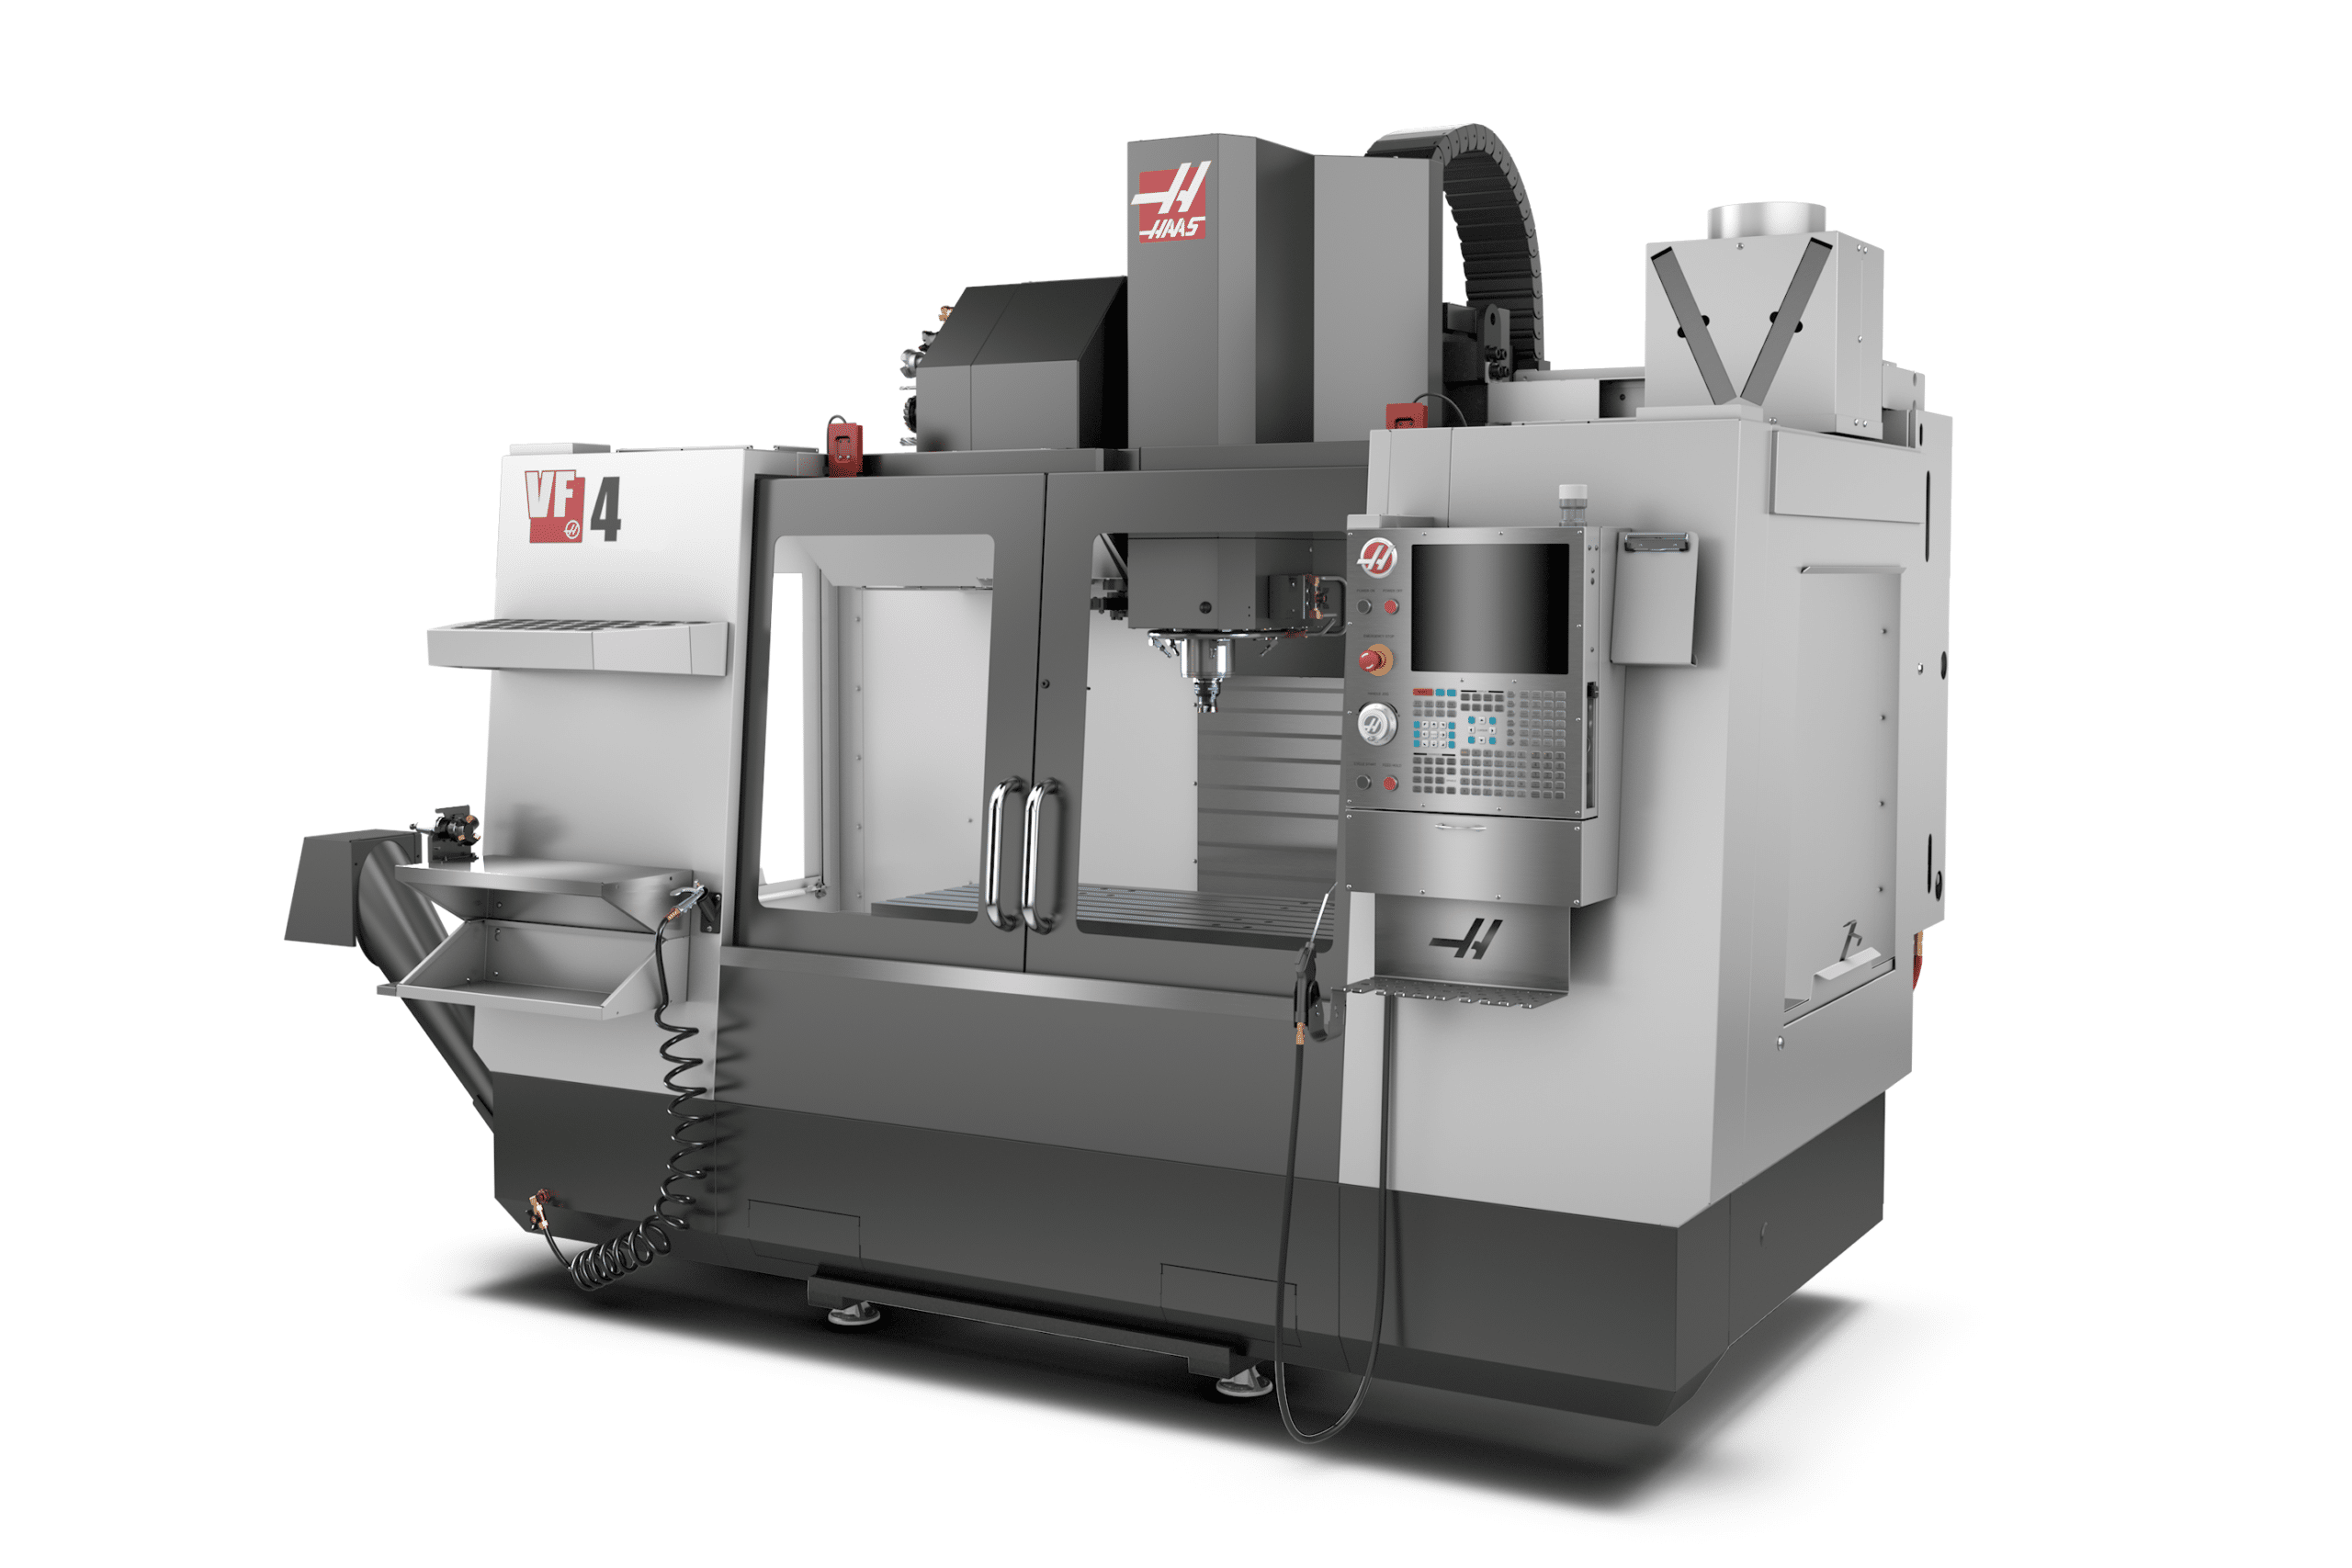 CNC_Milling_Machine_Made_by_Haas_Model_VF4